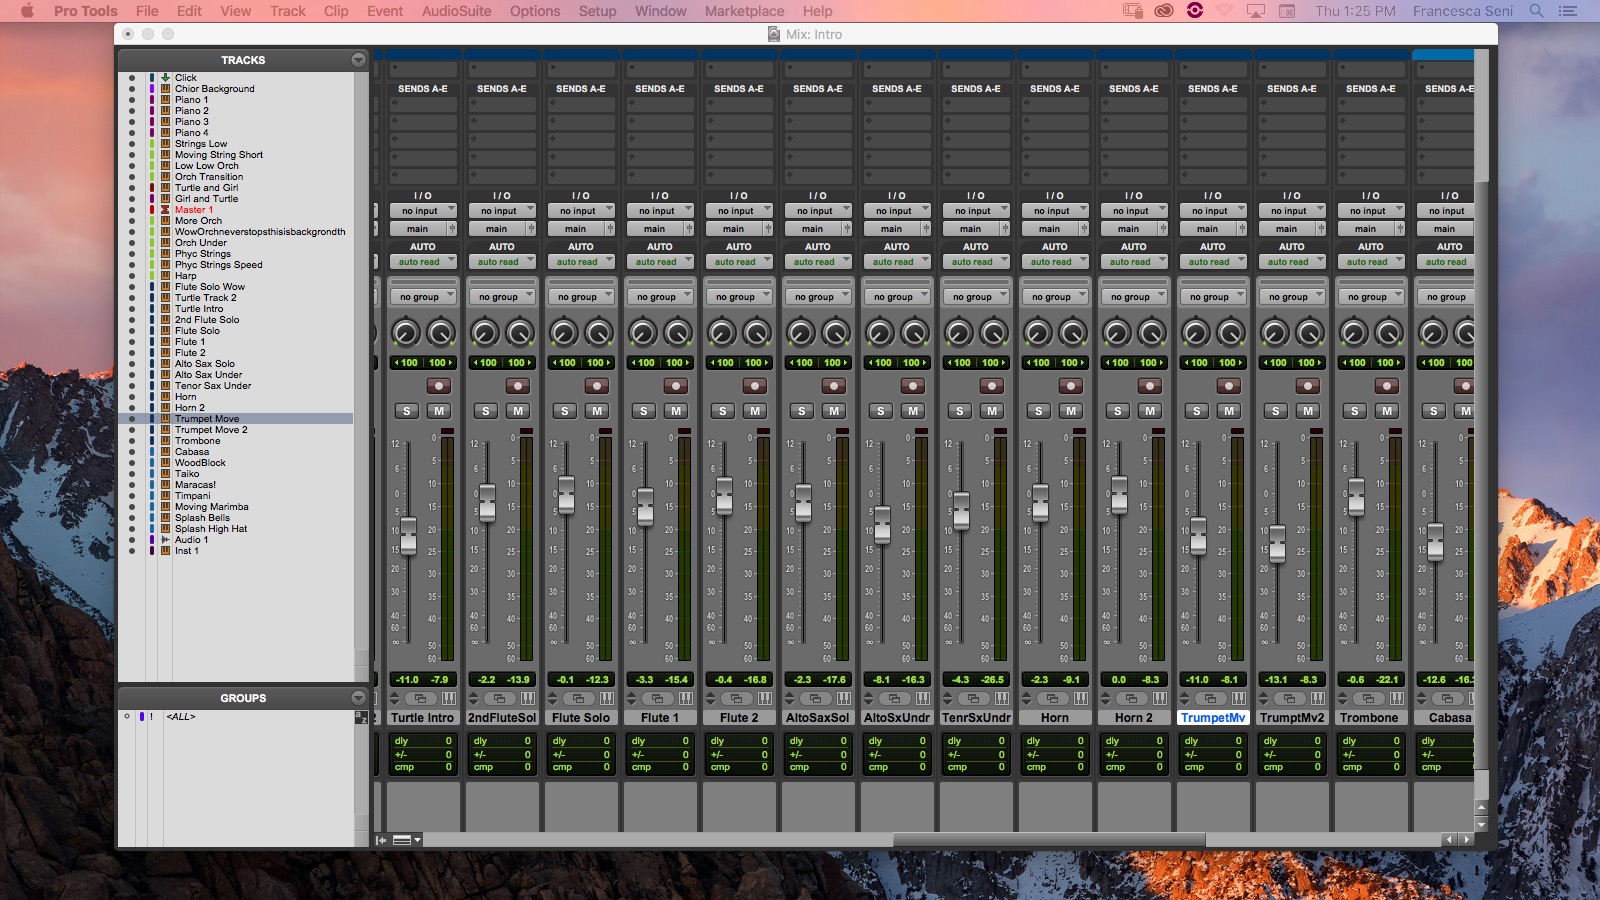 This is a screenshot of the Pro Tools Mixer which I used to control the volume of different tracks